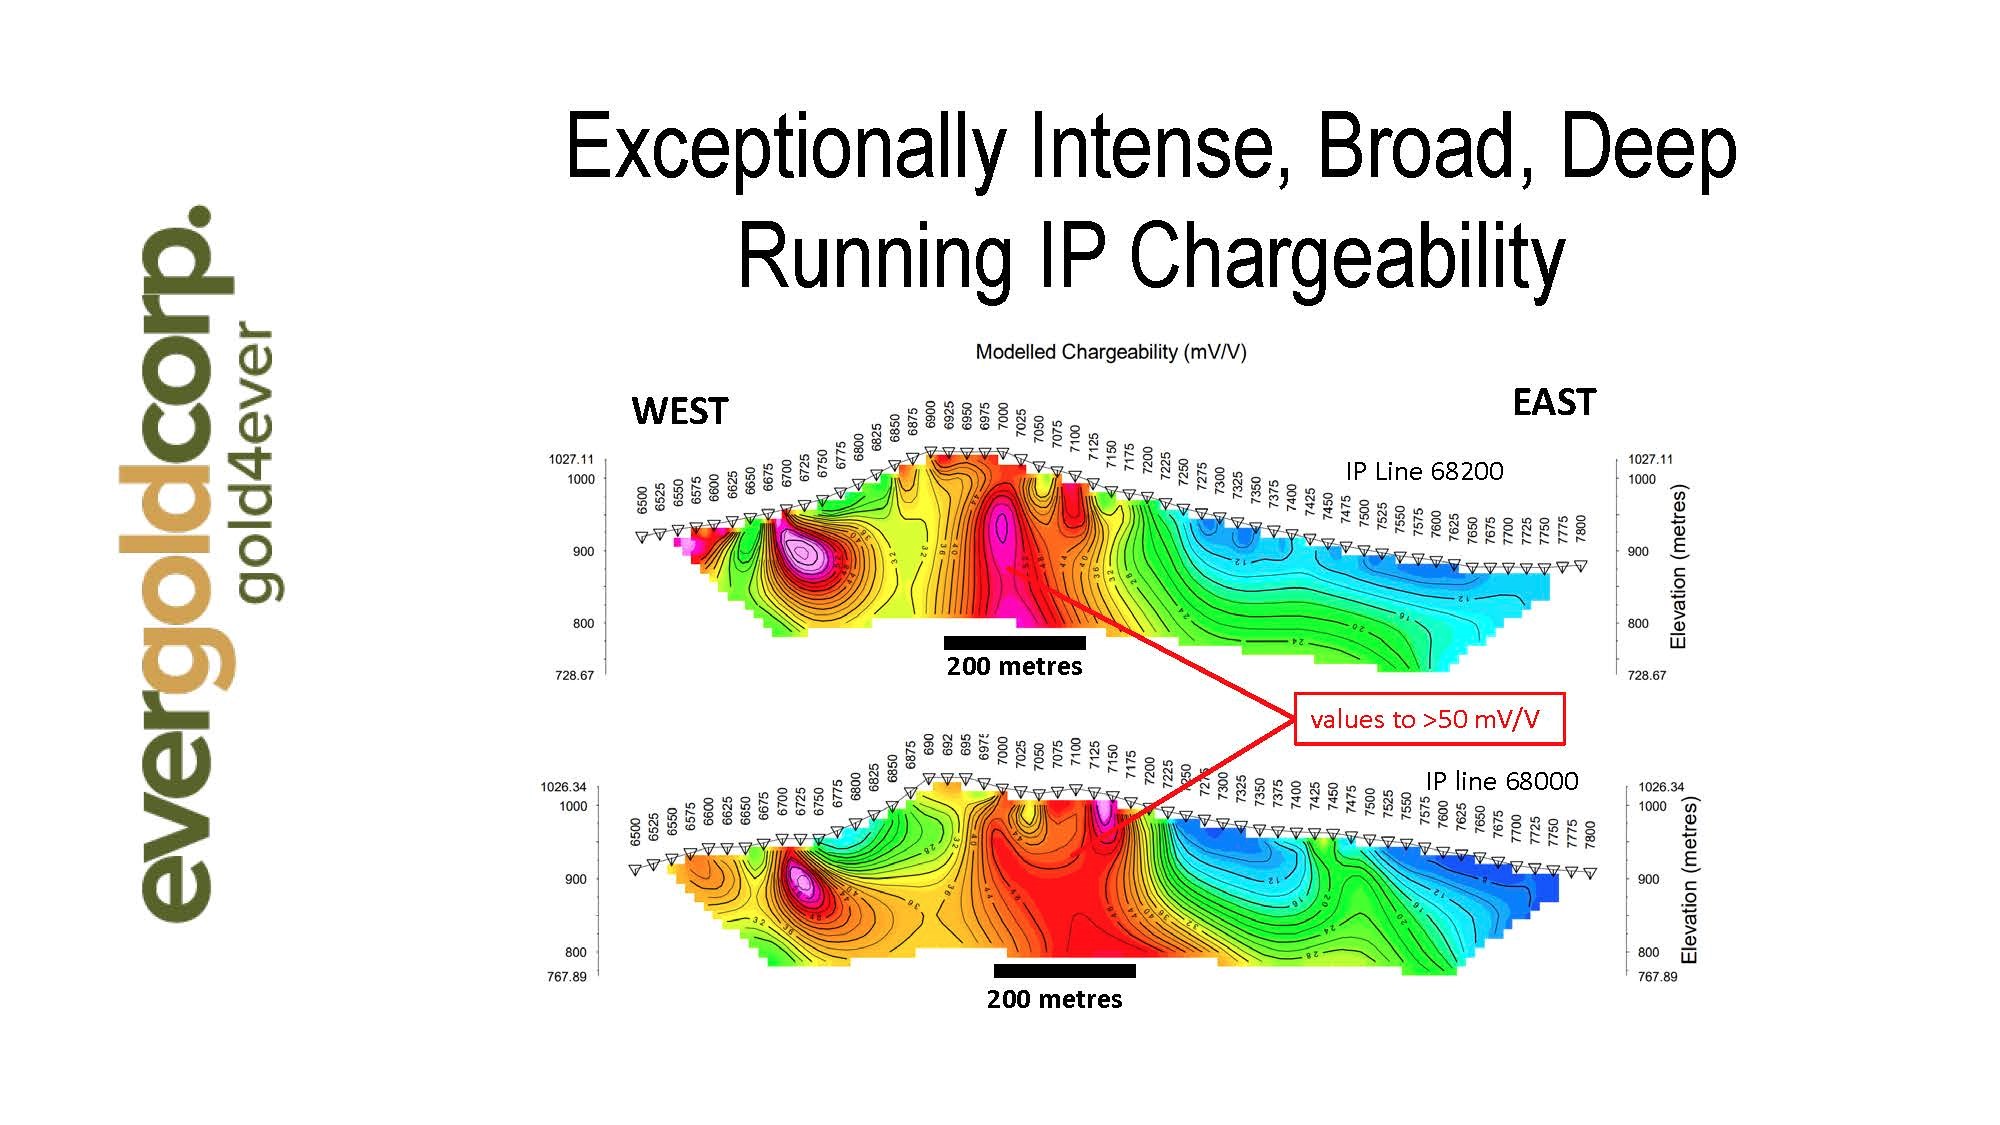 Figure 5 - DEM IP Chargeability